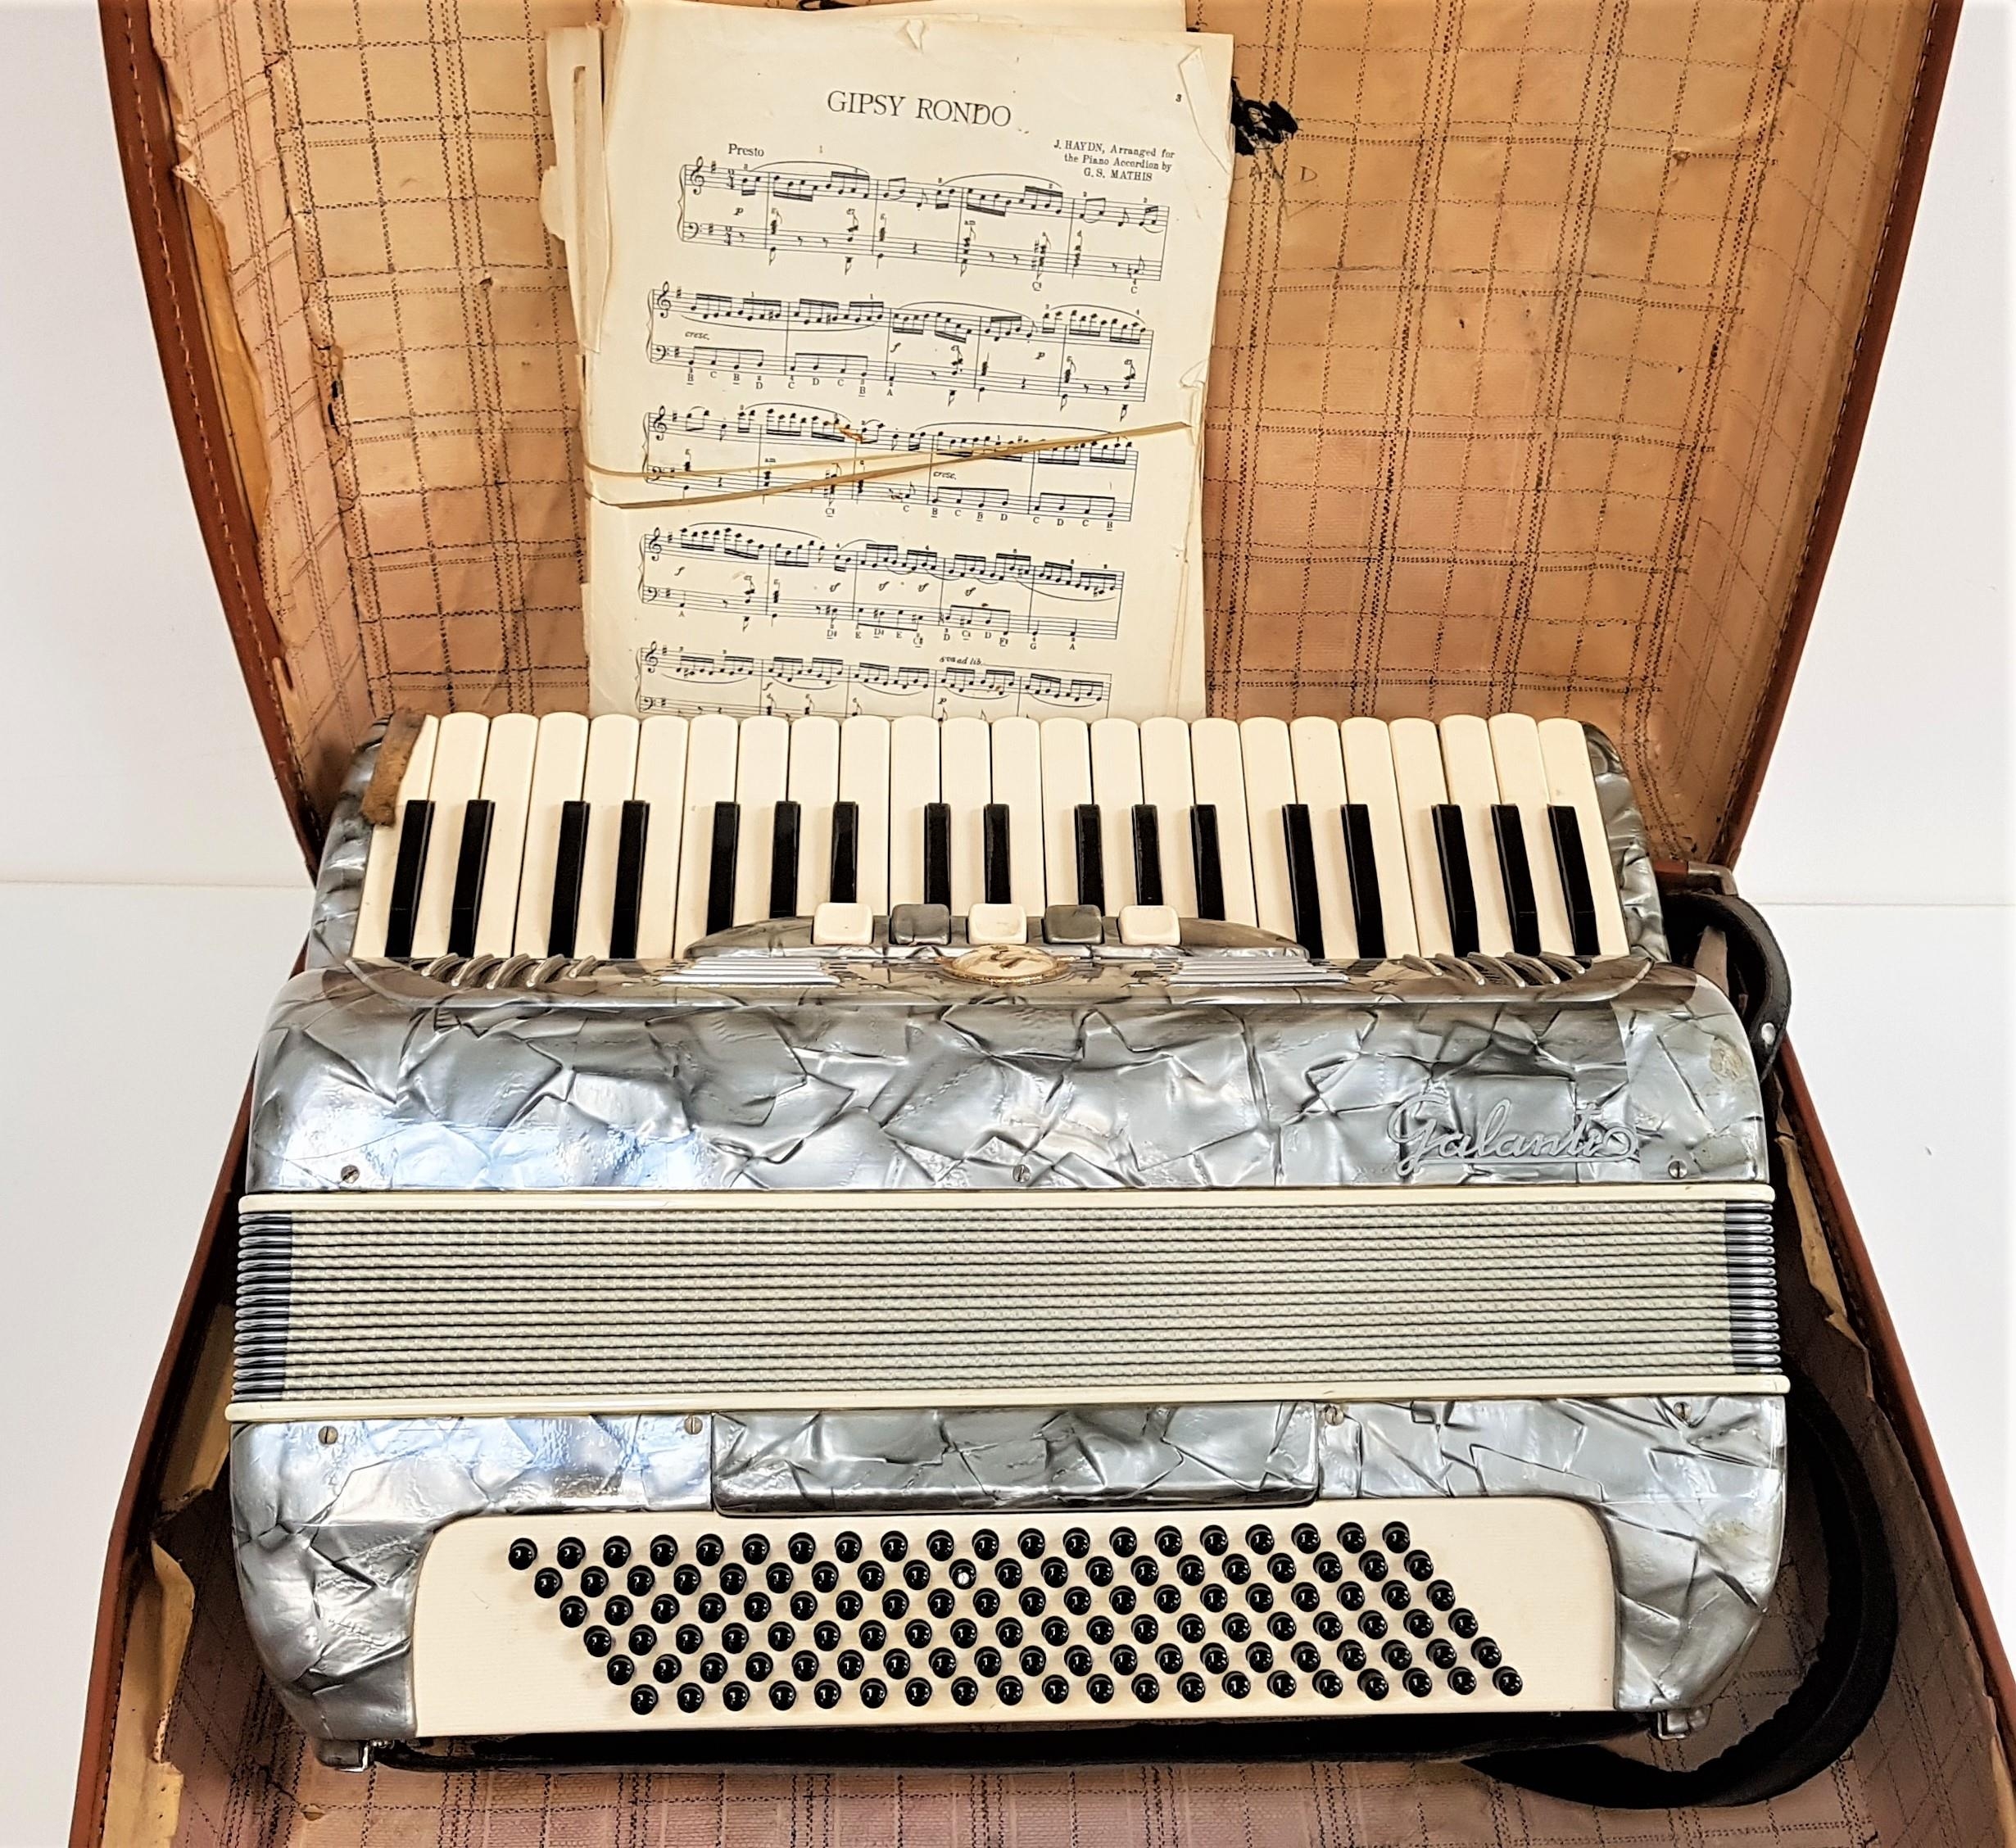 GALANTIO ACCORDIAN with a mottled grey body with shoulder straps and travel case, with a selection